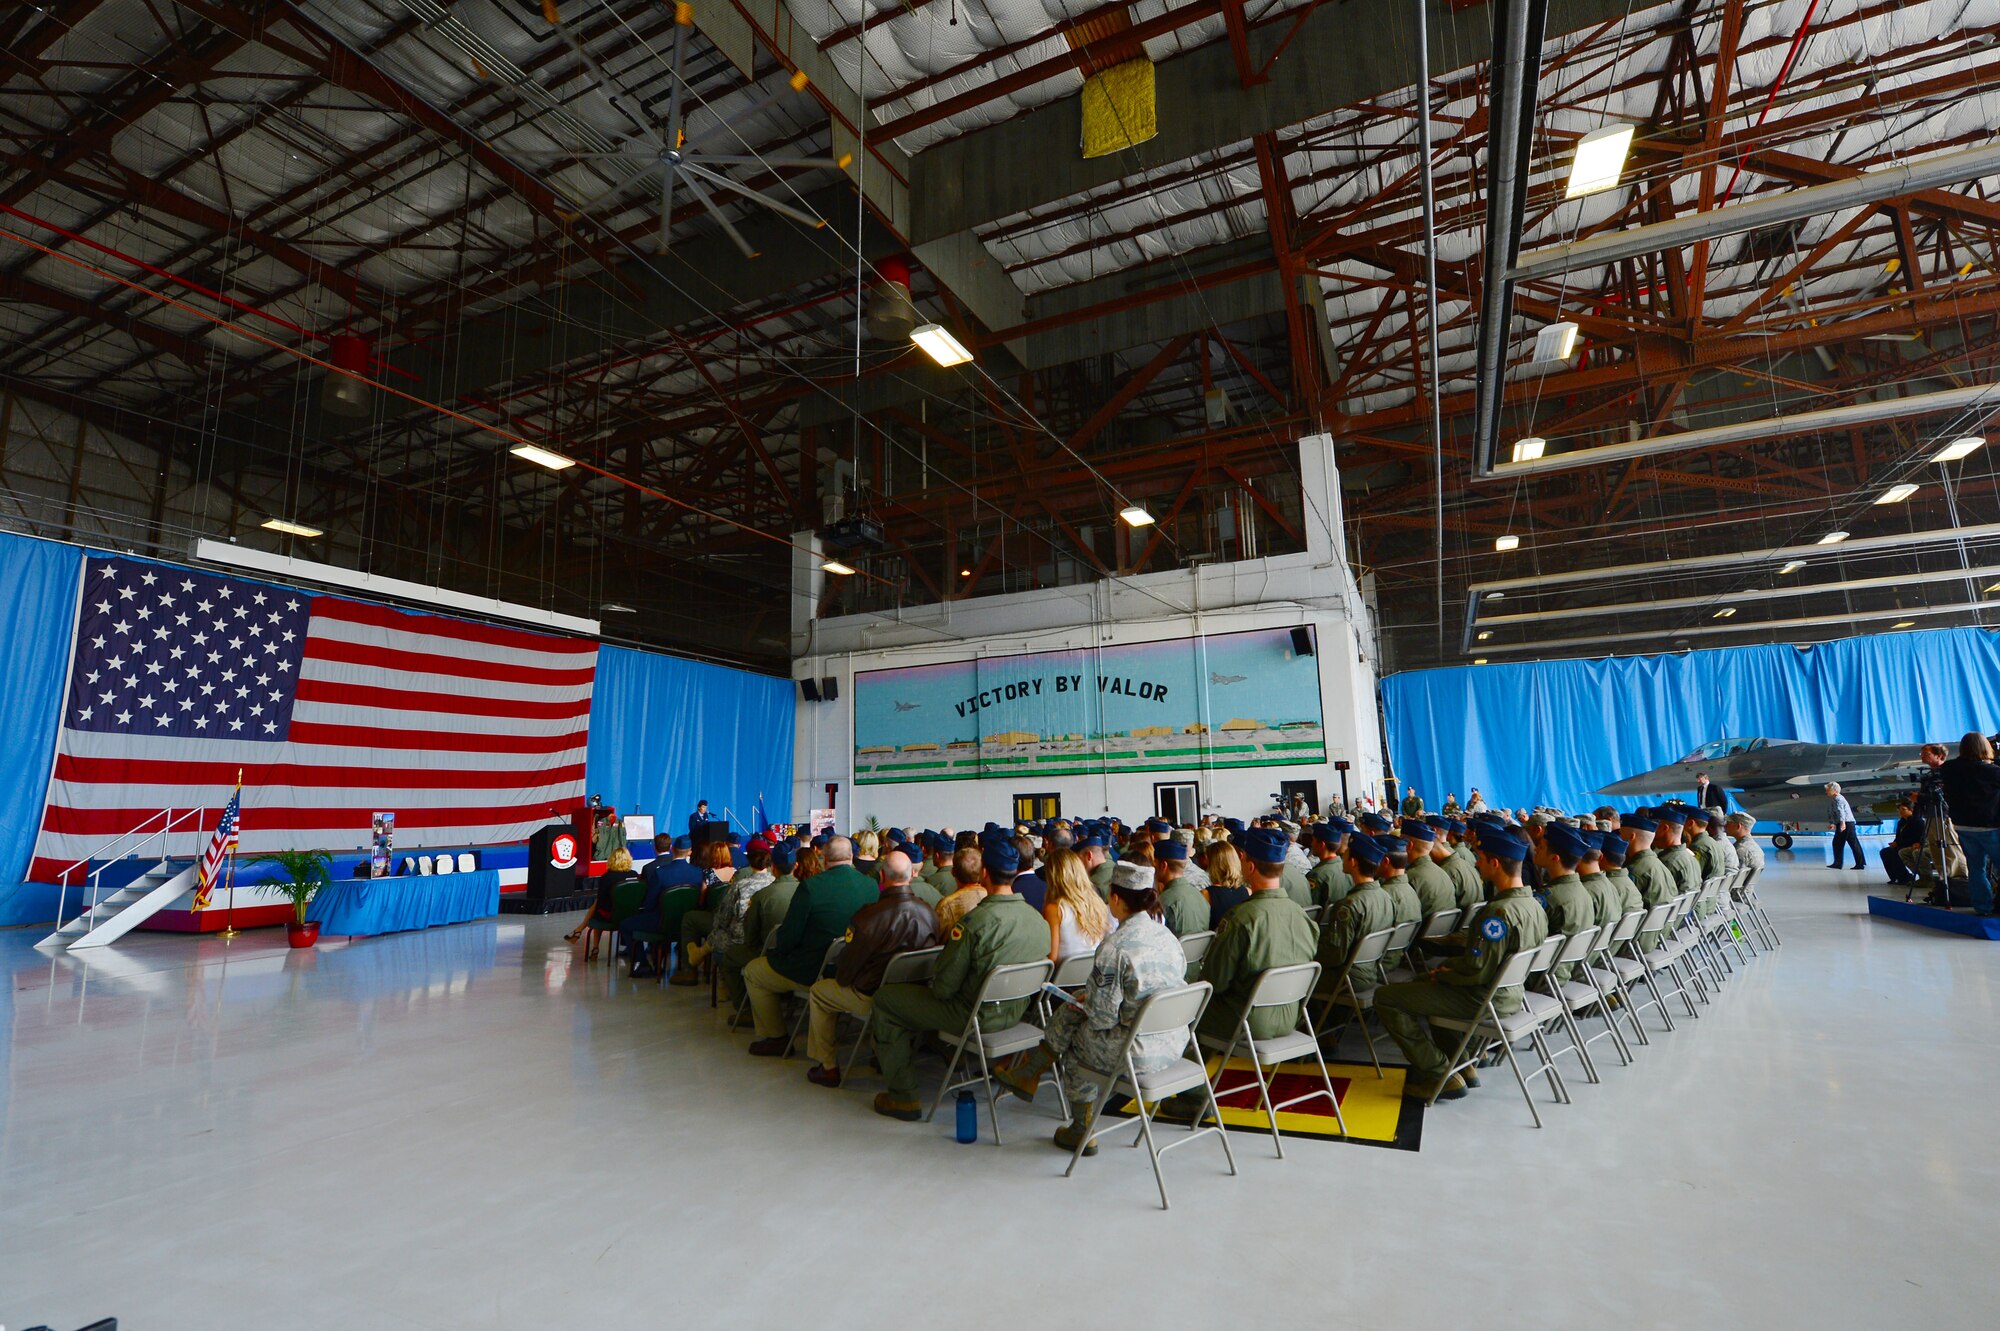 Family, friends and service members gather for a memorial ceremony at Shaw Air Force Base, S.C., April 30, 2013.  The memorial ceremony commemorated the life and accomplishments of Capt. James Steel, 77th Fighter Squadron pilot, who died in an F-16 Fighting Falcon aircraft accident, while deployed to Afghanistan.  (U.S. Air Force photo by Airman 1st Class Nicole Sikorski/Released)